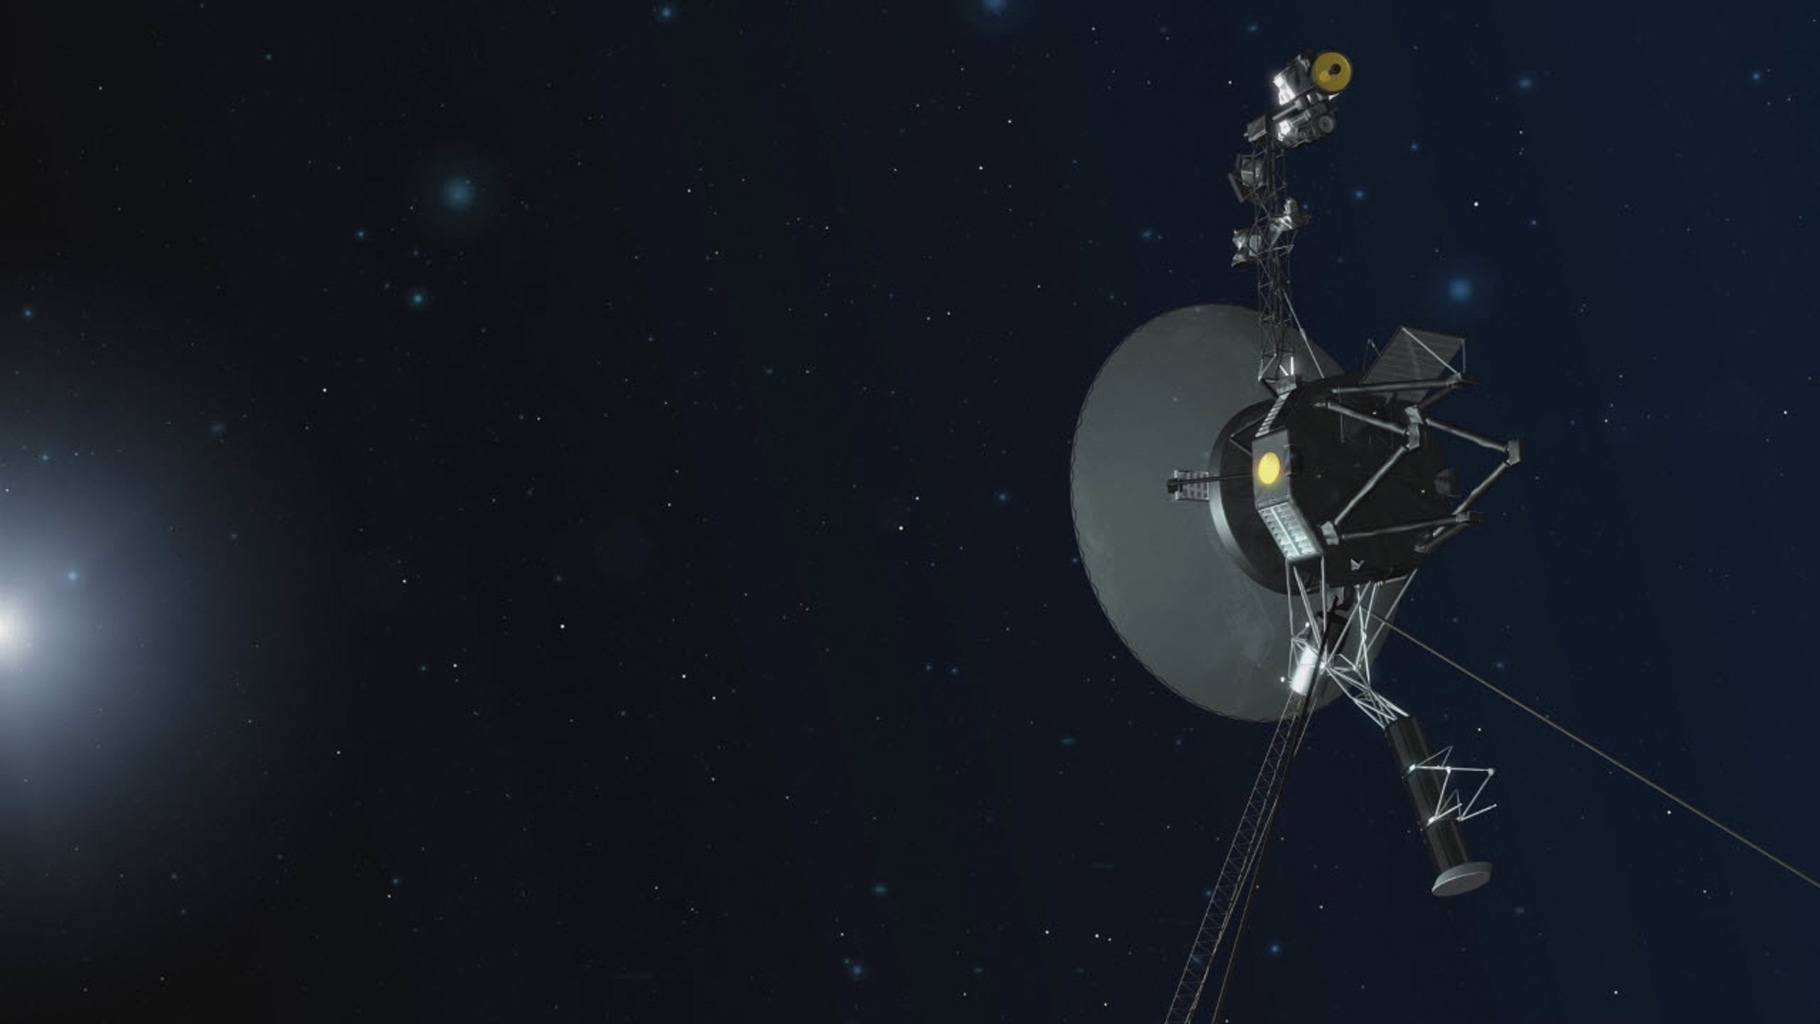 An artist concept depicting one of NASA's twin Voyager spacecraft. Humanity's farthest and longest-lived spacecraft are celebrating 40 years in August and September 2017. Image: NASA/JPL-Caltech